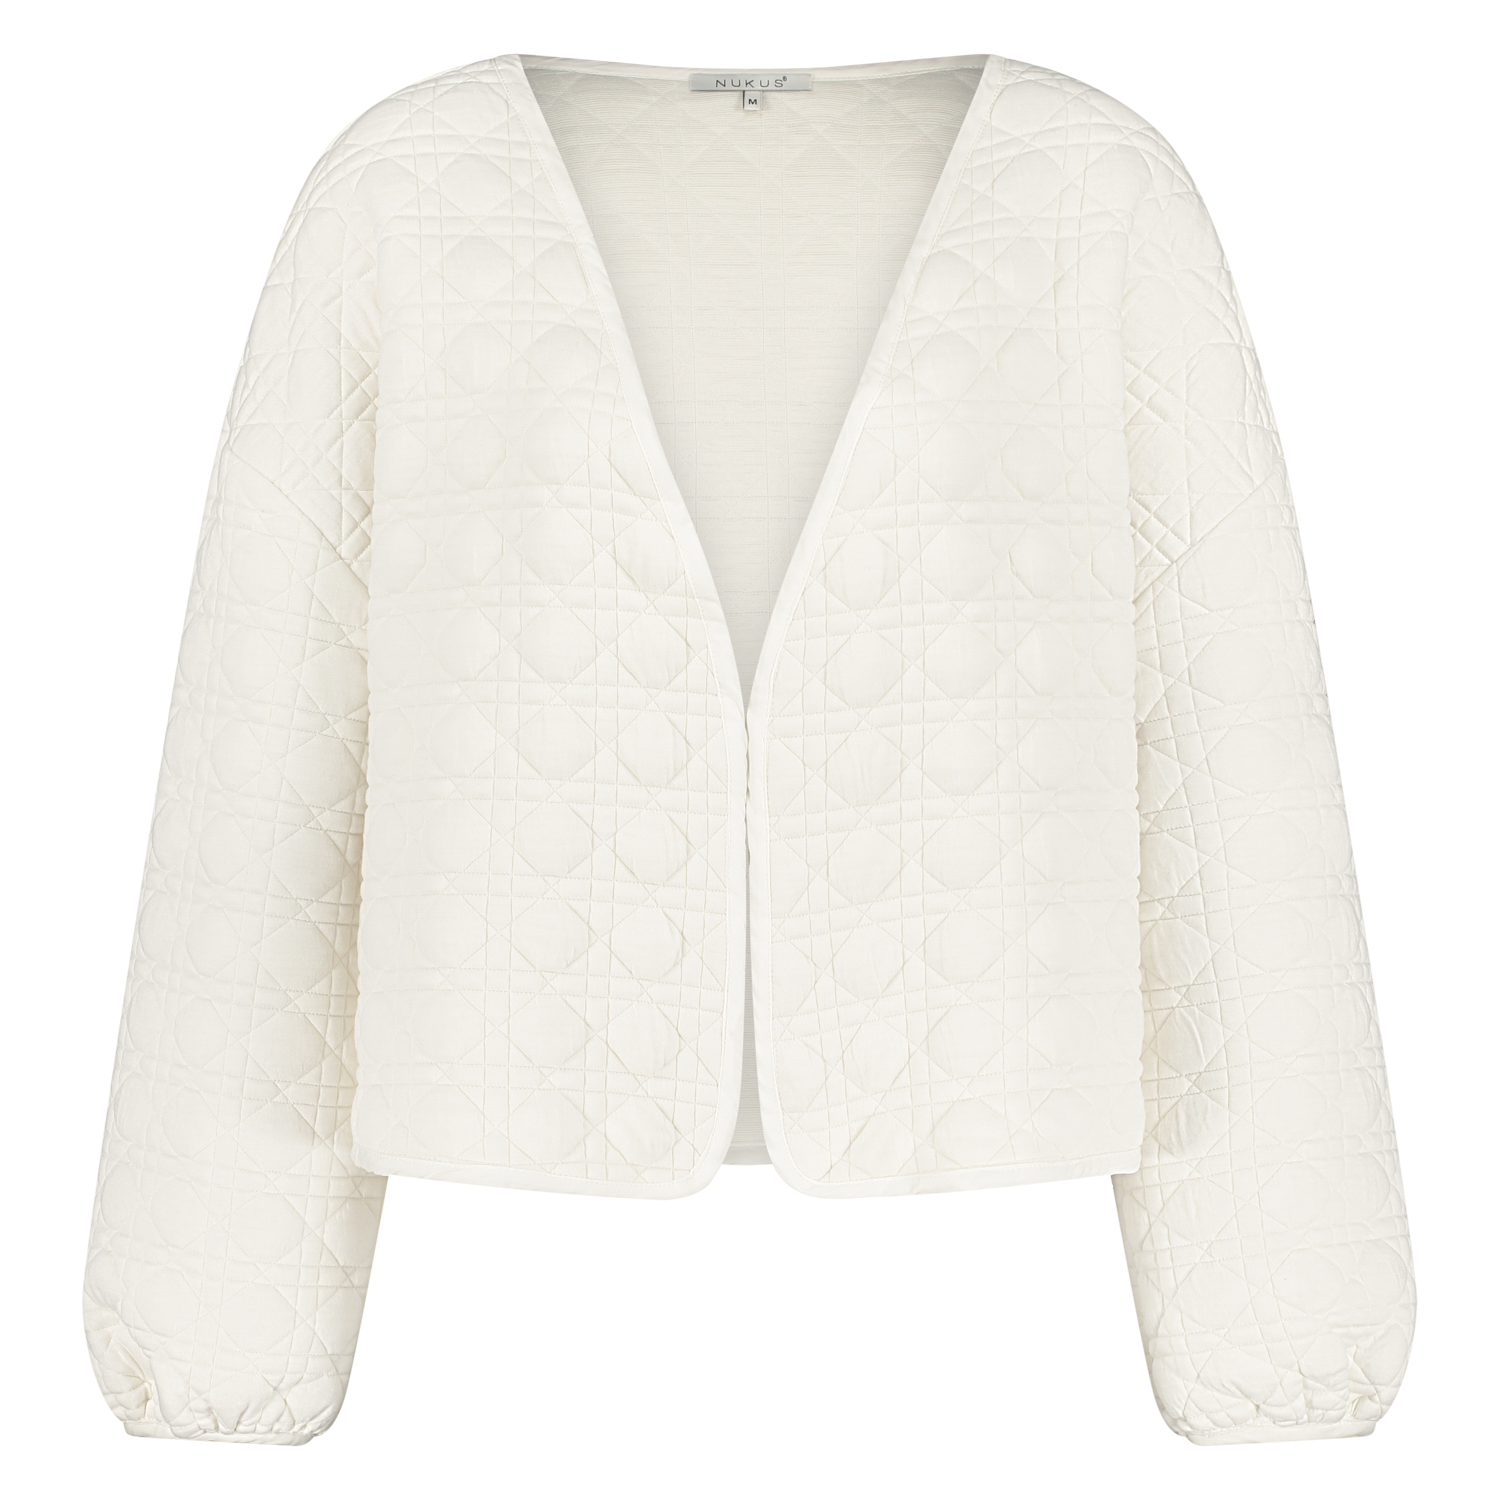 Wiona cardigan_off white_front